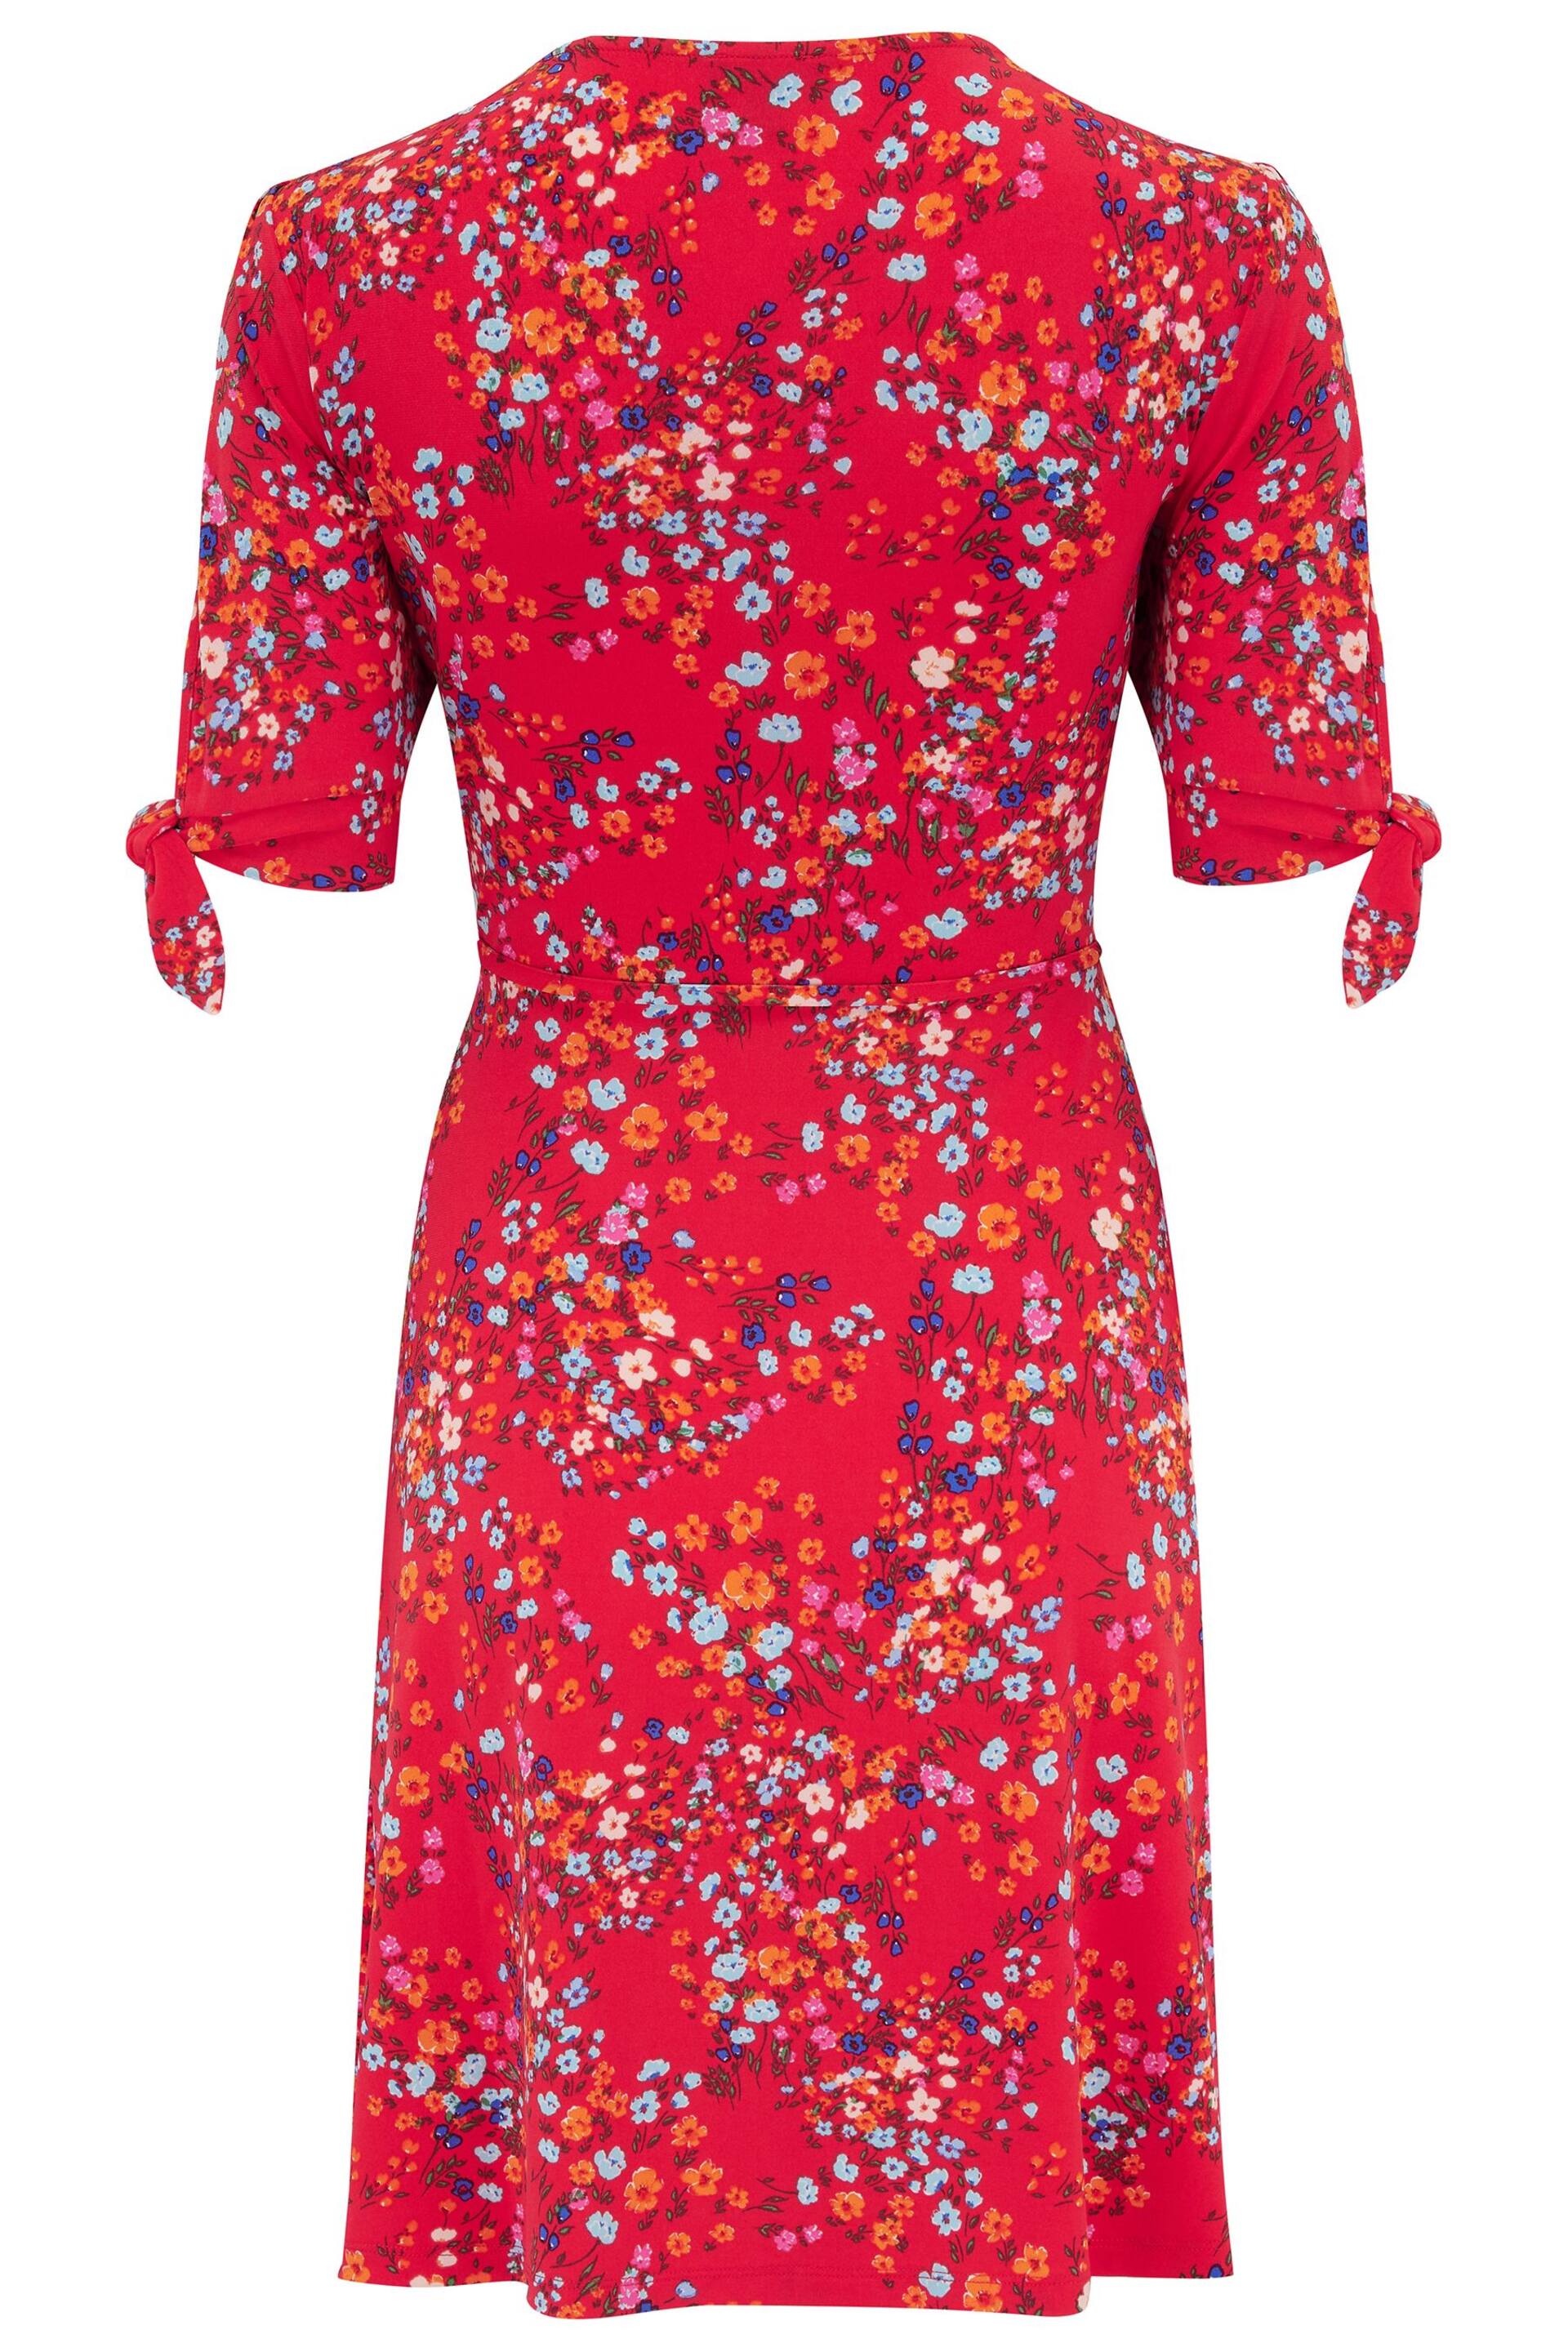 Pour Moi Red Multi Floral Bella Fuller Bust Slinky Stretch Tie Sleeve Mini Dress - Image 5 of 5